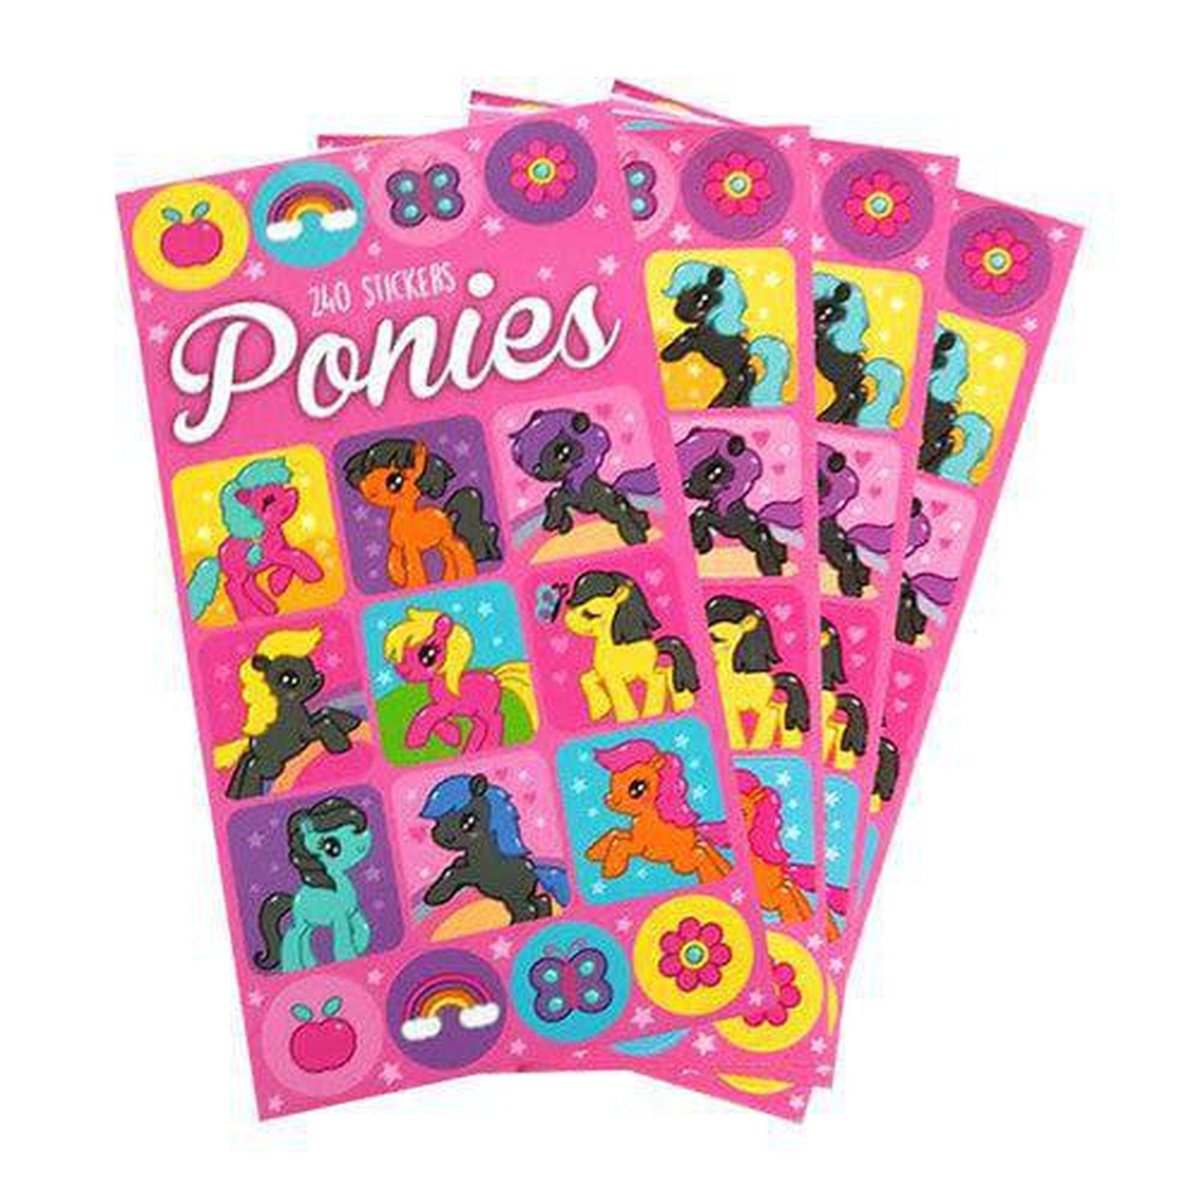 Ponies Mini Sticker Book(12 Sheets) - Kids Party Craft